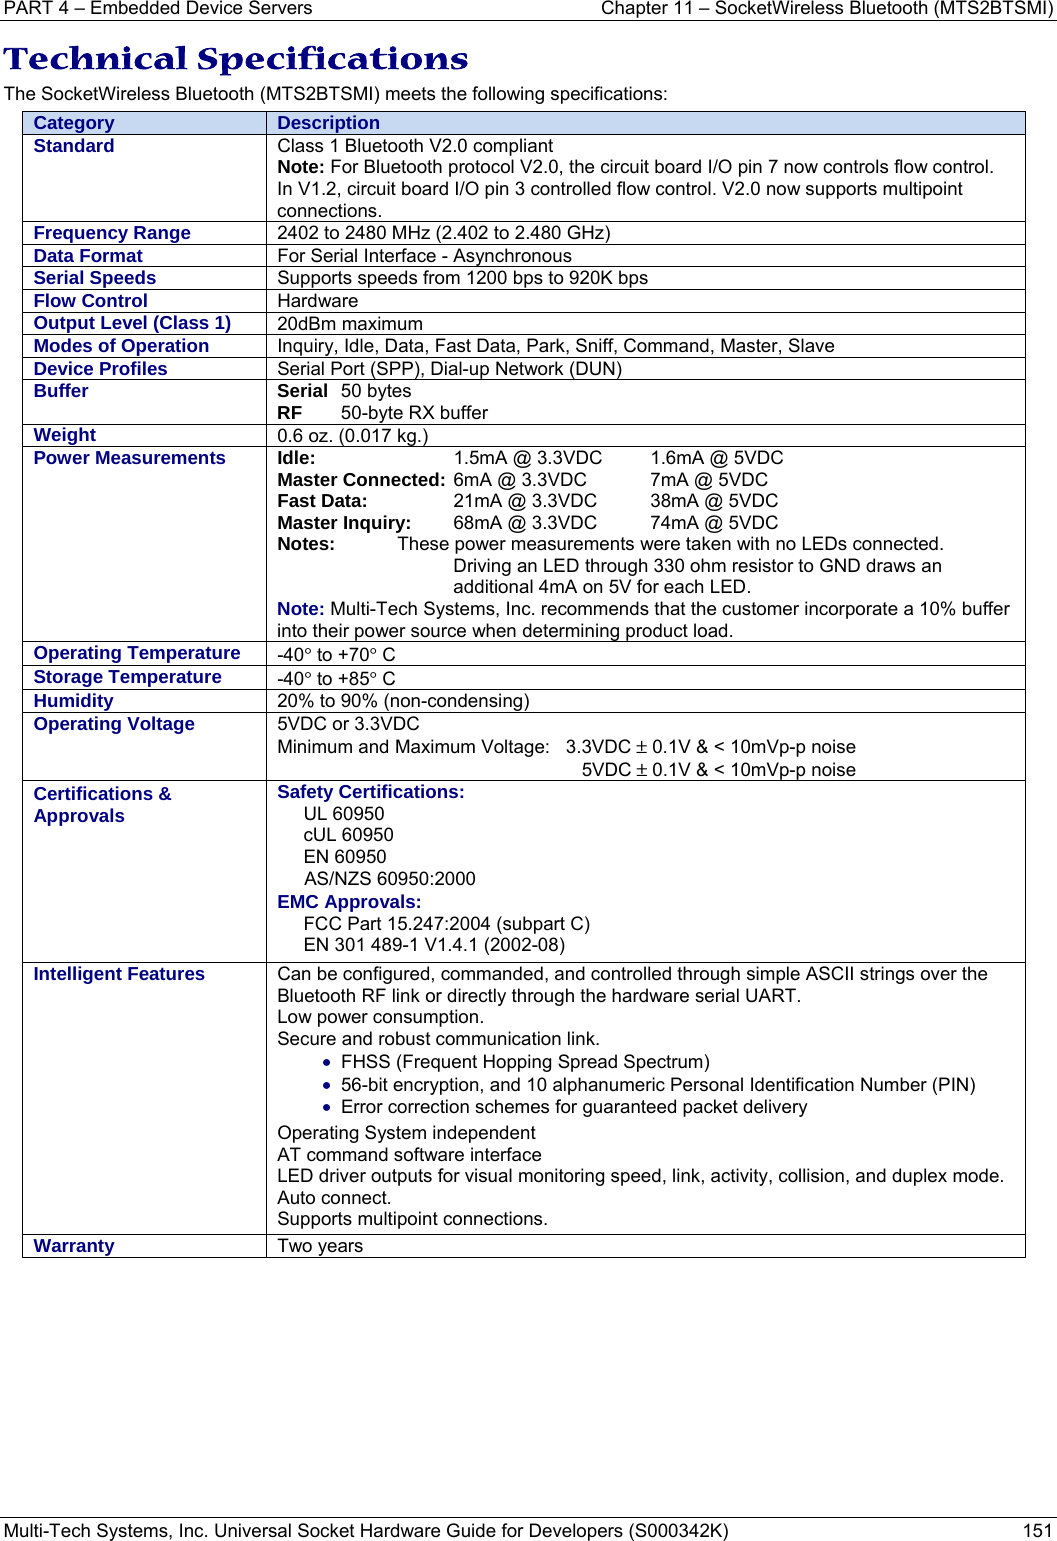 PART 4 – Embedded Device Servers  Chapter 11 – SocketWireless Bluetooth (MTS2BTSMI) Multi-Tech Systems, Inc. Universal Socket Hardware Guide for Developers (S000342K)  151  Technical Specifications The SocketWireless Bluetooth (MTS2BTSMI) meets the following specifications:  Category  Description Standard  Class 1 Bluetooth V2.0 compliant Note: For Bluetooth protocol V2.0, the circuit board I/O pin 7 now controls flow control. In V1.2, circuit board I/O pin 3 controlled flow control. V2.0 now supports multipoint connections. Frequency Range  2402 to 2480 MHz (2.402 to 2.480 GHz) Data Format  For Serial Interface - Asynchronous Serial Speeds  Supports speeds from 1200 bps to 920K bps       Flow Control  Hardware Output Level (Class 1)  20dBm maximum Modes of Operation  Inquiry, Idle, Data, Fast Data, Park, Sniff, Command, Master, Slave Device Profiles  Serial Port (SPP), Dial-up Network (DUN) Buffer Serial  50 bytes RF    50-byte RX buffer Weight  0.6 oz. (0.017 kg.) Power Measurements  Idle:  1.5mA @ 3.3VDC   1.6mA @ 5VDC Master Connected:  6mA @ 3.3VDC   7mA @ 5VDC Fast Data:  21mA @ 3.3VDC  38mA @ 5VDC Master Inquiry:  68mA @ 3.3VDC  74mA @ 5VDC   Notes:  These power measurements were taken with no LEDs connected.    Driving an LED through 330 ohm resistor to GND draws an additional 4mA on 5V for each LED.  Note: Multi-Tech Systems, Inc. recommends that the customer incorporate a 10% buffer into their power source when determining product load. Operating Temperature  -40° to +70° C Storage Temperature  -40° to +85° C Humidity  20% to 90% (non-condensing)    Operating Voltage  5VDC or 3.3VDC    Minimum and Maximum Voltage:   3.3VDC ± 0.1V &amp; &lt; 10mVp-p noise    5VDC ± 0.1V &amp; &lt; 10mVp-p noise Certifications &amp; Approvals  Safety Certifications:UL 60950 cUL 60950 EN 60950 AS/NZS 60950:2000 EMC Approvals: FCC Part 15.247:2004 (subpart C) EN 301 489-1 V1.4.1 (2002-08) Intelligent Features  Can be configured, commanded, and controlled through simple ASCII strings over the Bluetooth RF link or directly through the hardware serial UART. Low power consumption. Secure and robust communication link. • FHSS (Frequent Hopping Spread Spectrum) • 56-bit encryption, and 10 alphanumeric Personal Identification Number (PIN) • Error correction schemes for guaranteed packet delivery Operating System independent AT command software interface LED driver outputs for visual monitoring speed, link, activity, collision, and duplex mode. Auto connect. Supports multipoint connections. Warranty  Two years  